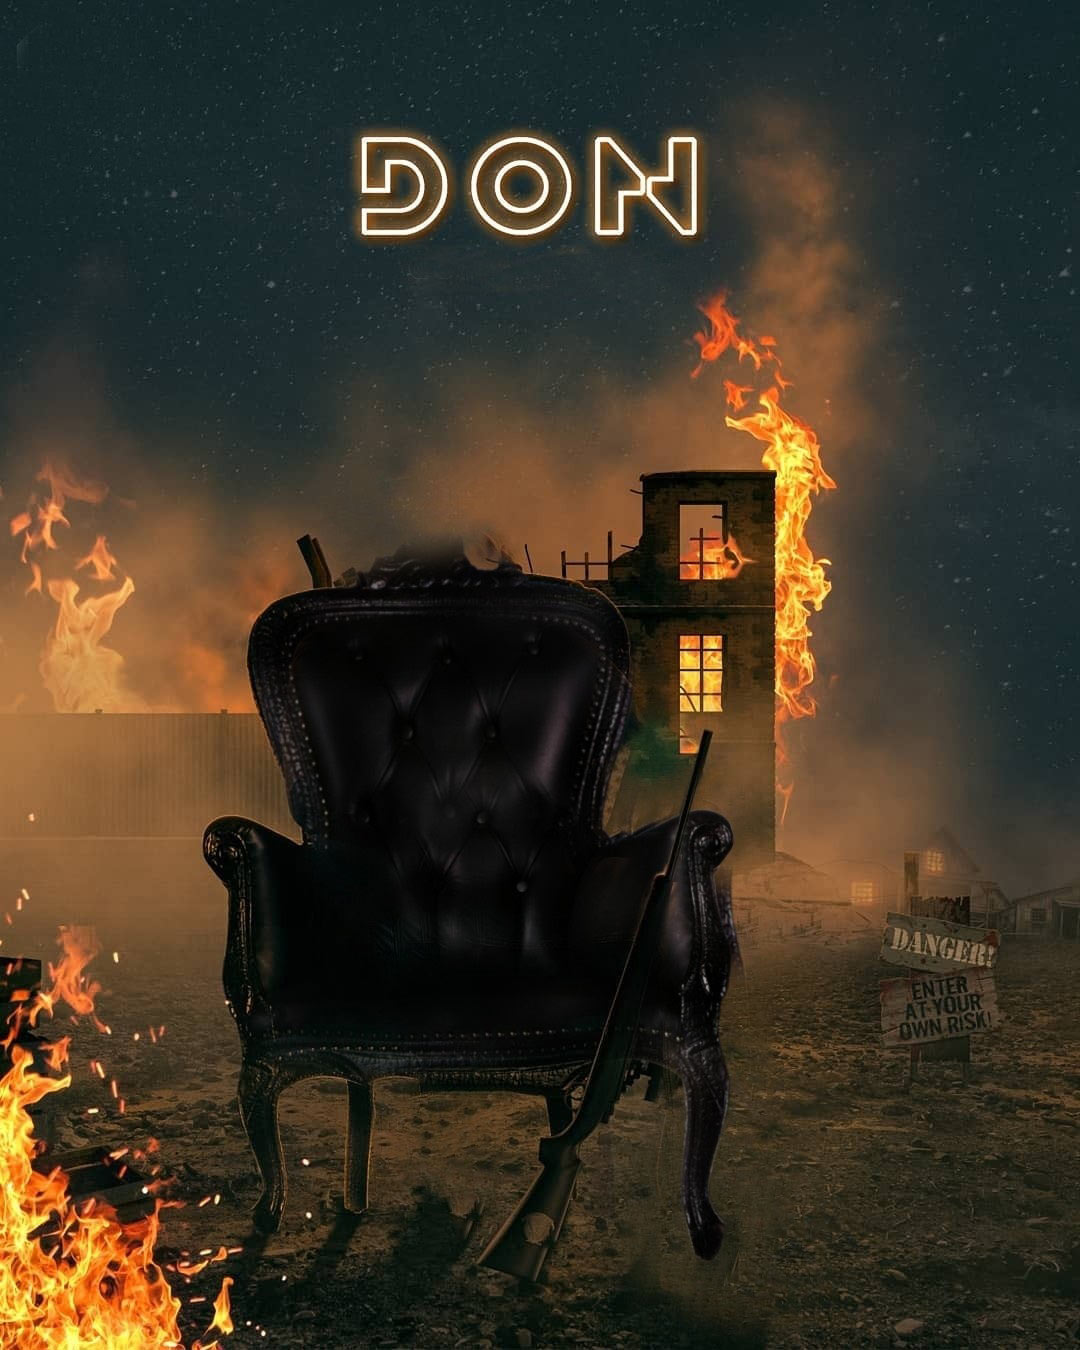 Don Movie Poster PicsArt Background Free Stock Image